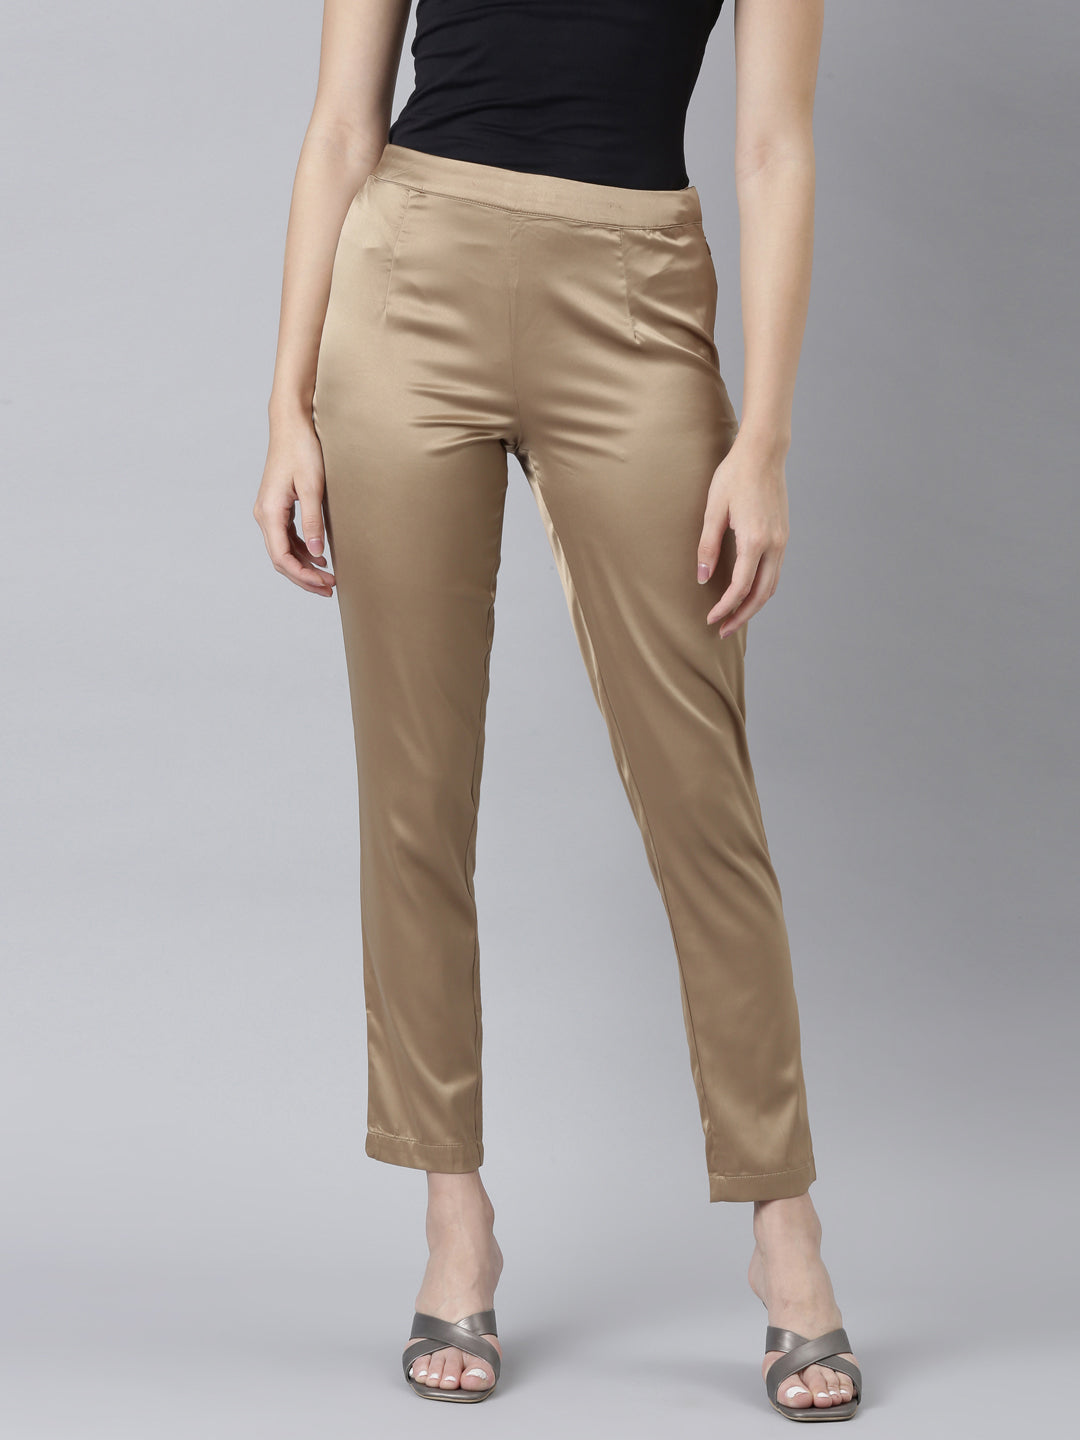 Pearl Work Designer Cigarette Pants at Rs 245/piece | New Items in Surat |  ID: 22647215691